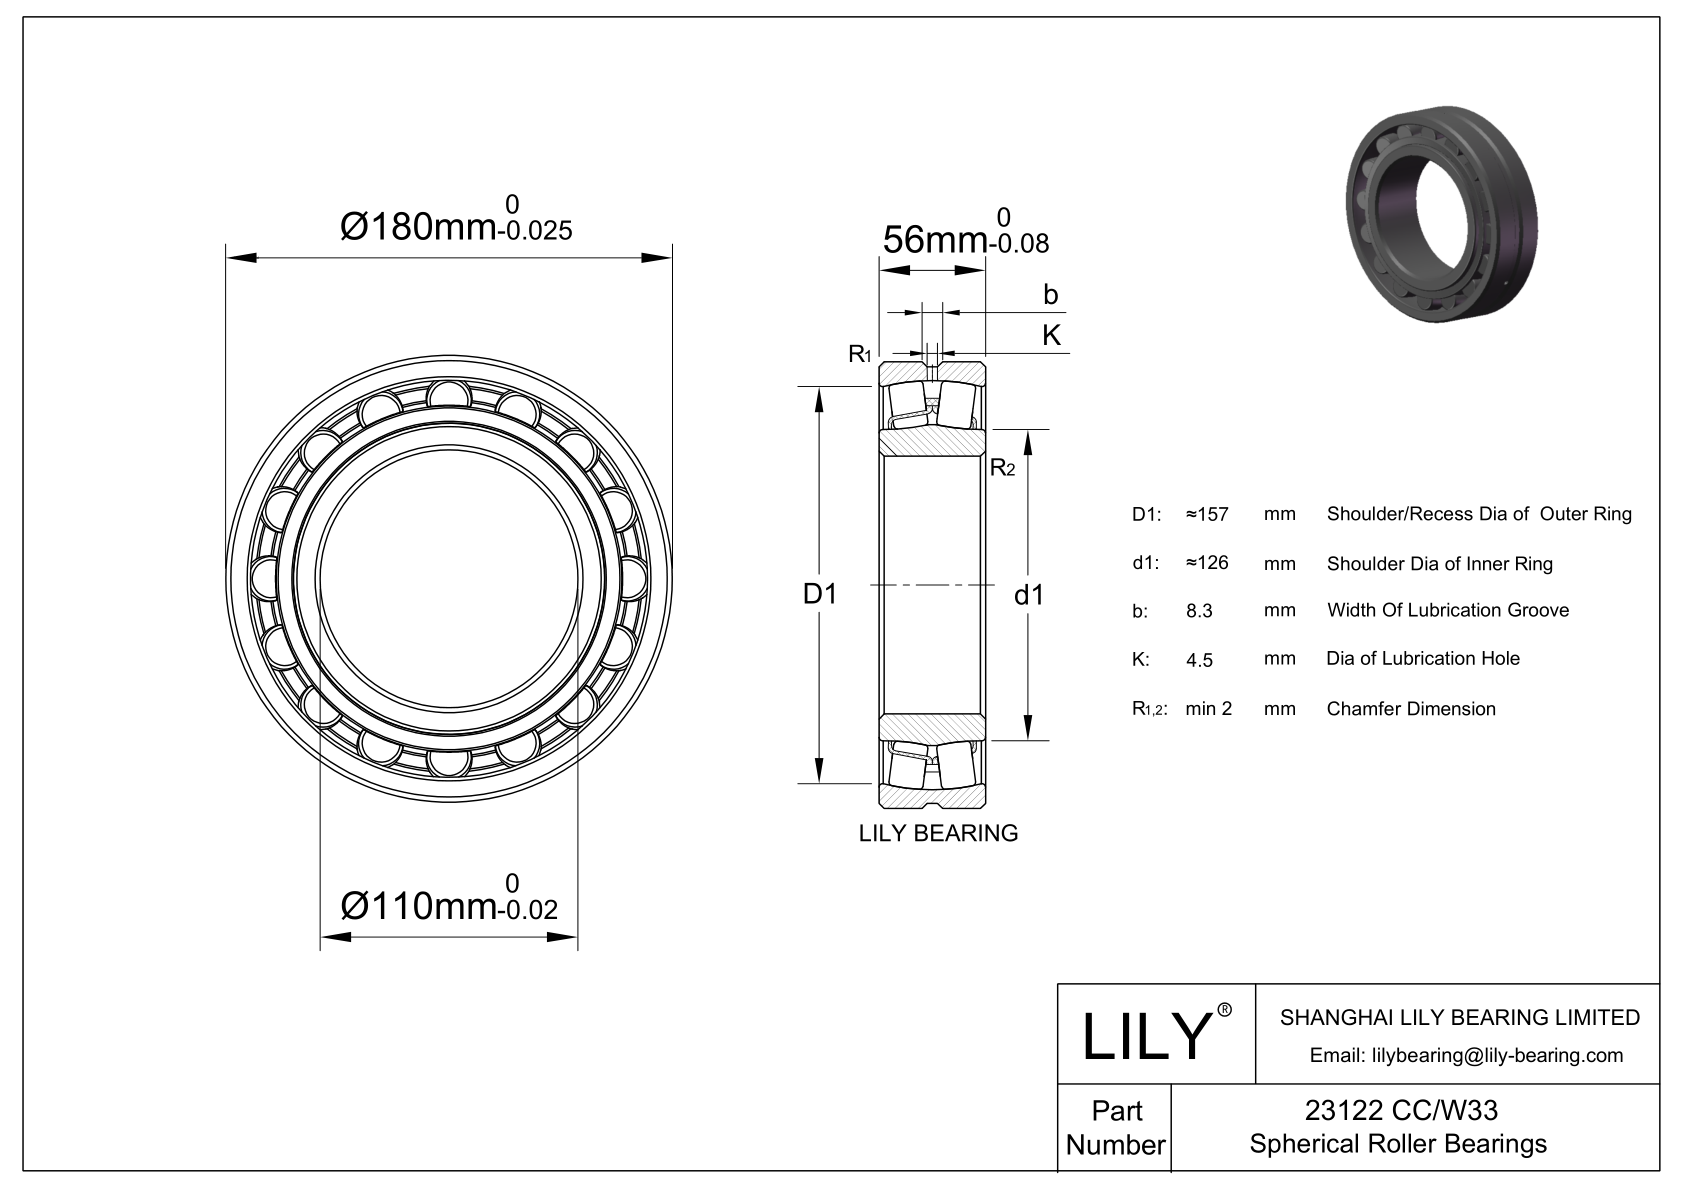 23122 CC/W33 Double Row Spherical Roller Bearing cad drawing